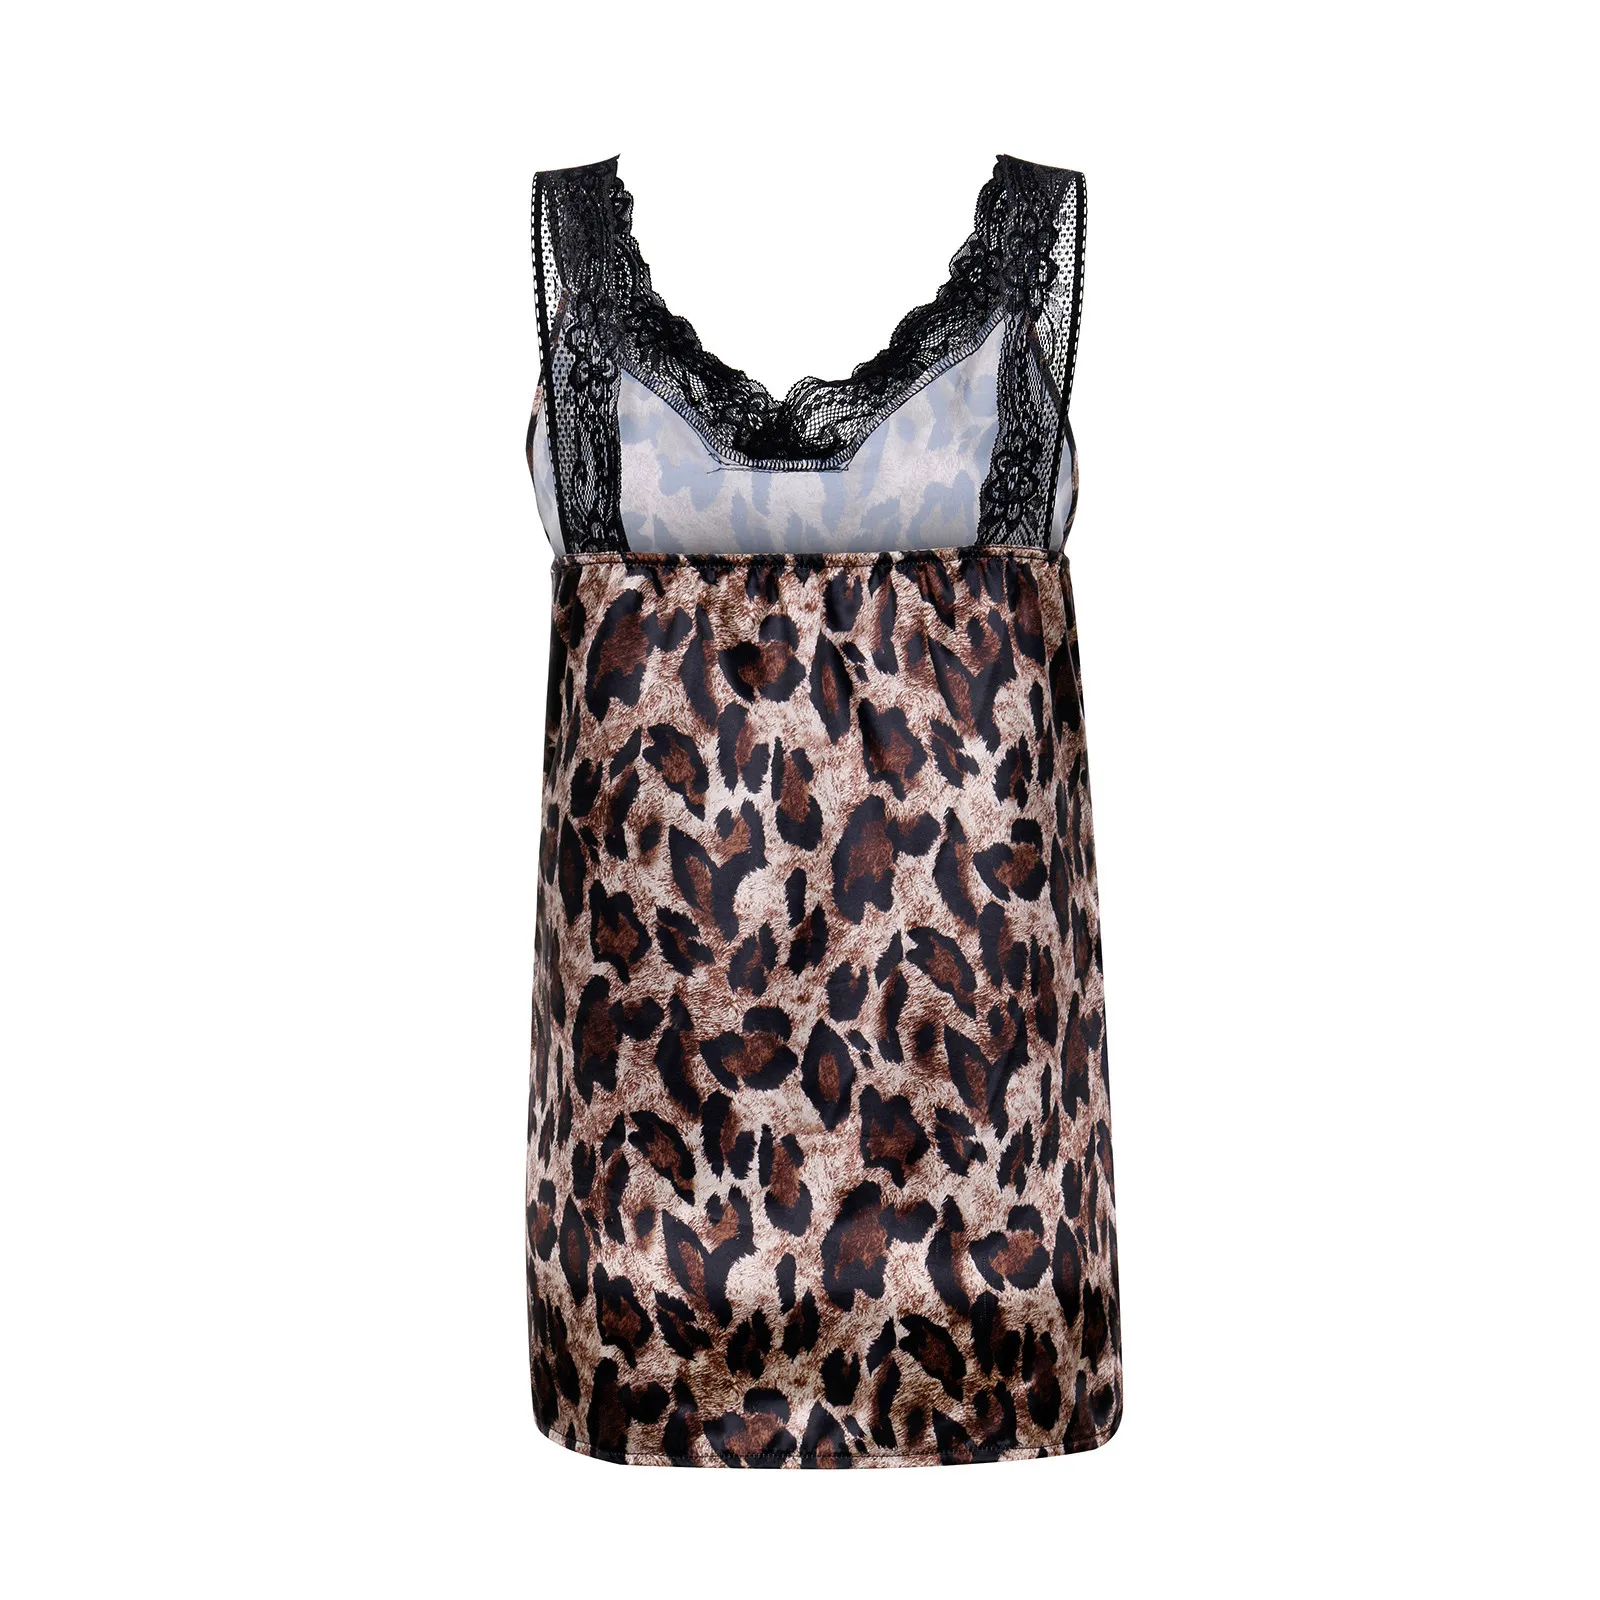 Fashion Plus Size Tops Women  Summer Sexy  Leopard Print Sleeveless Vest Lace Camisole Casual Tank Tops Blouses